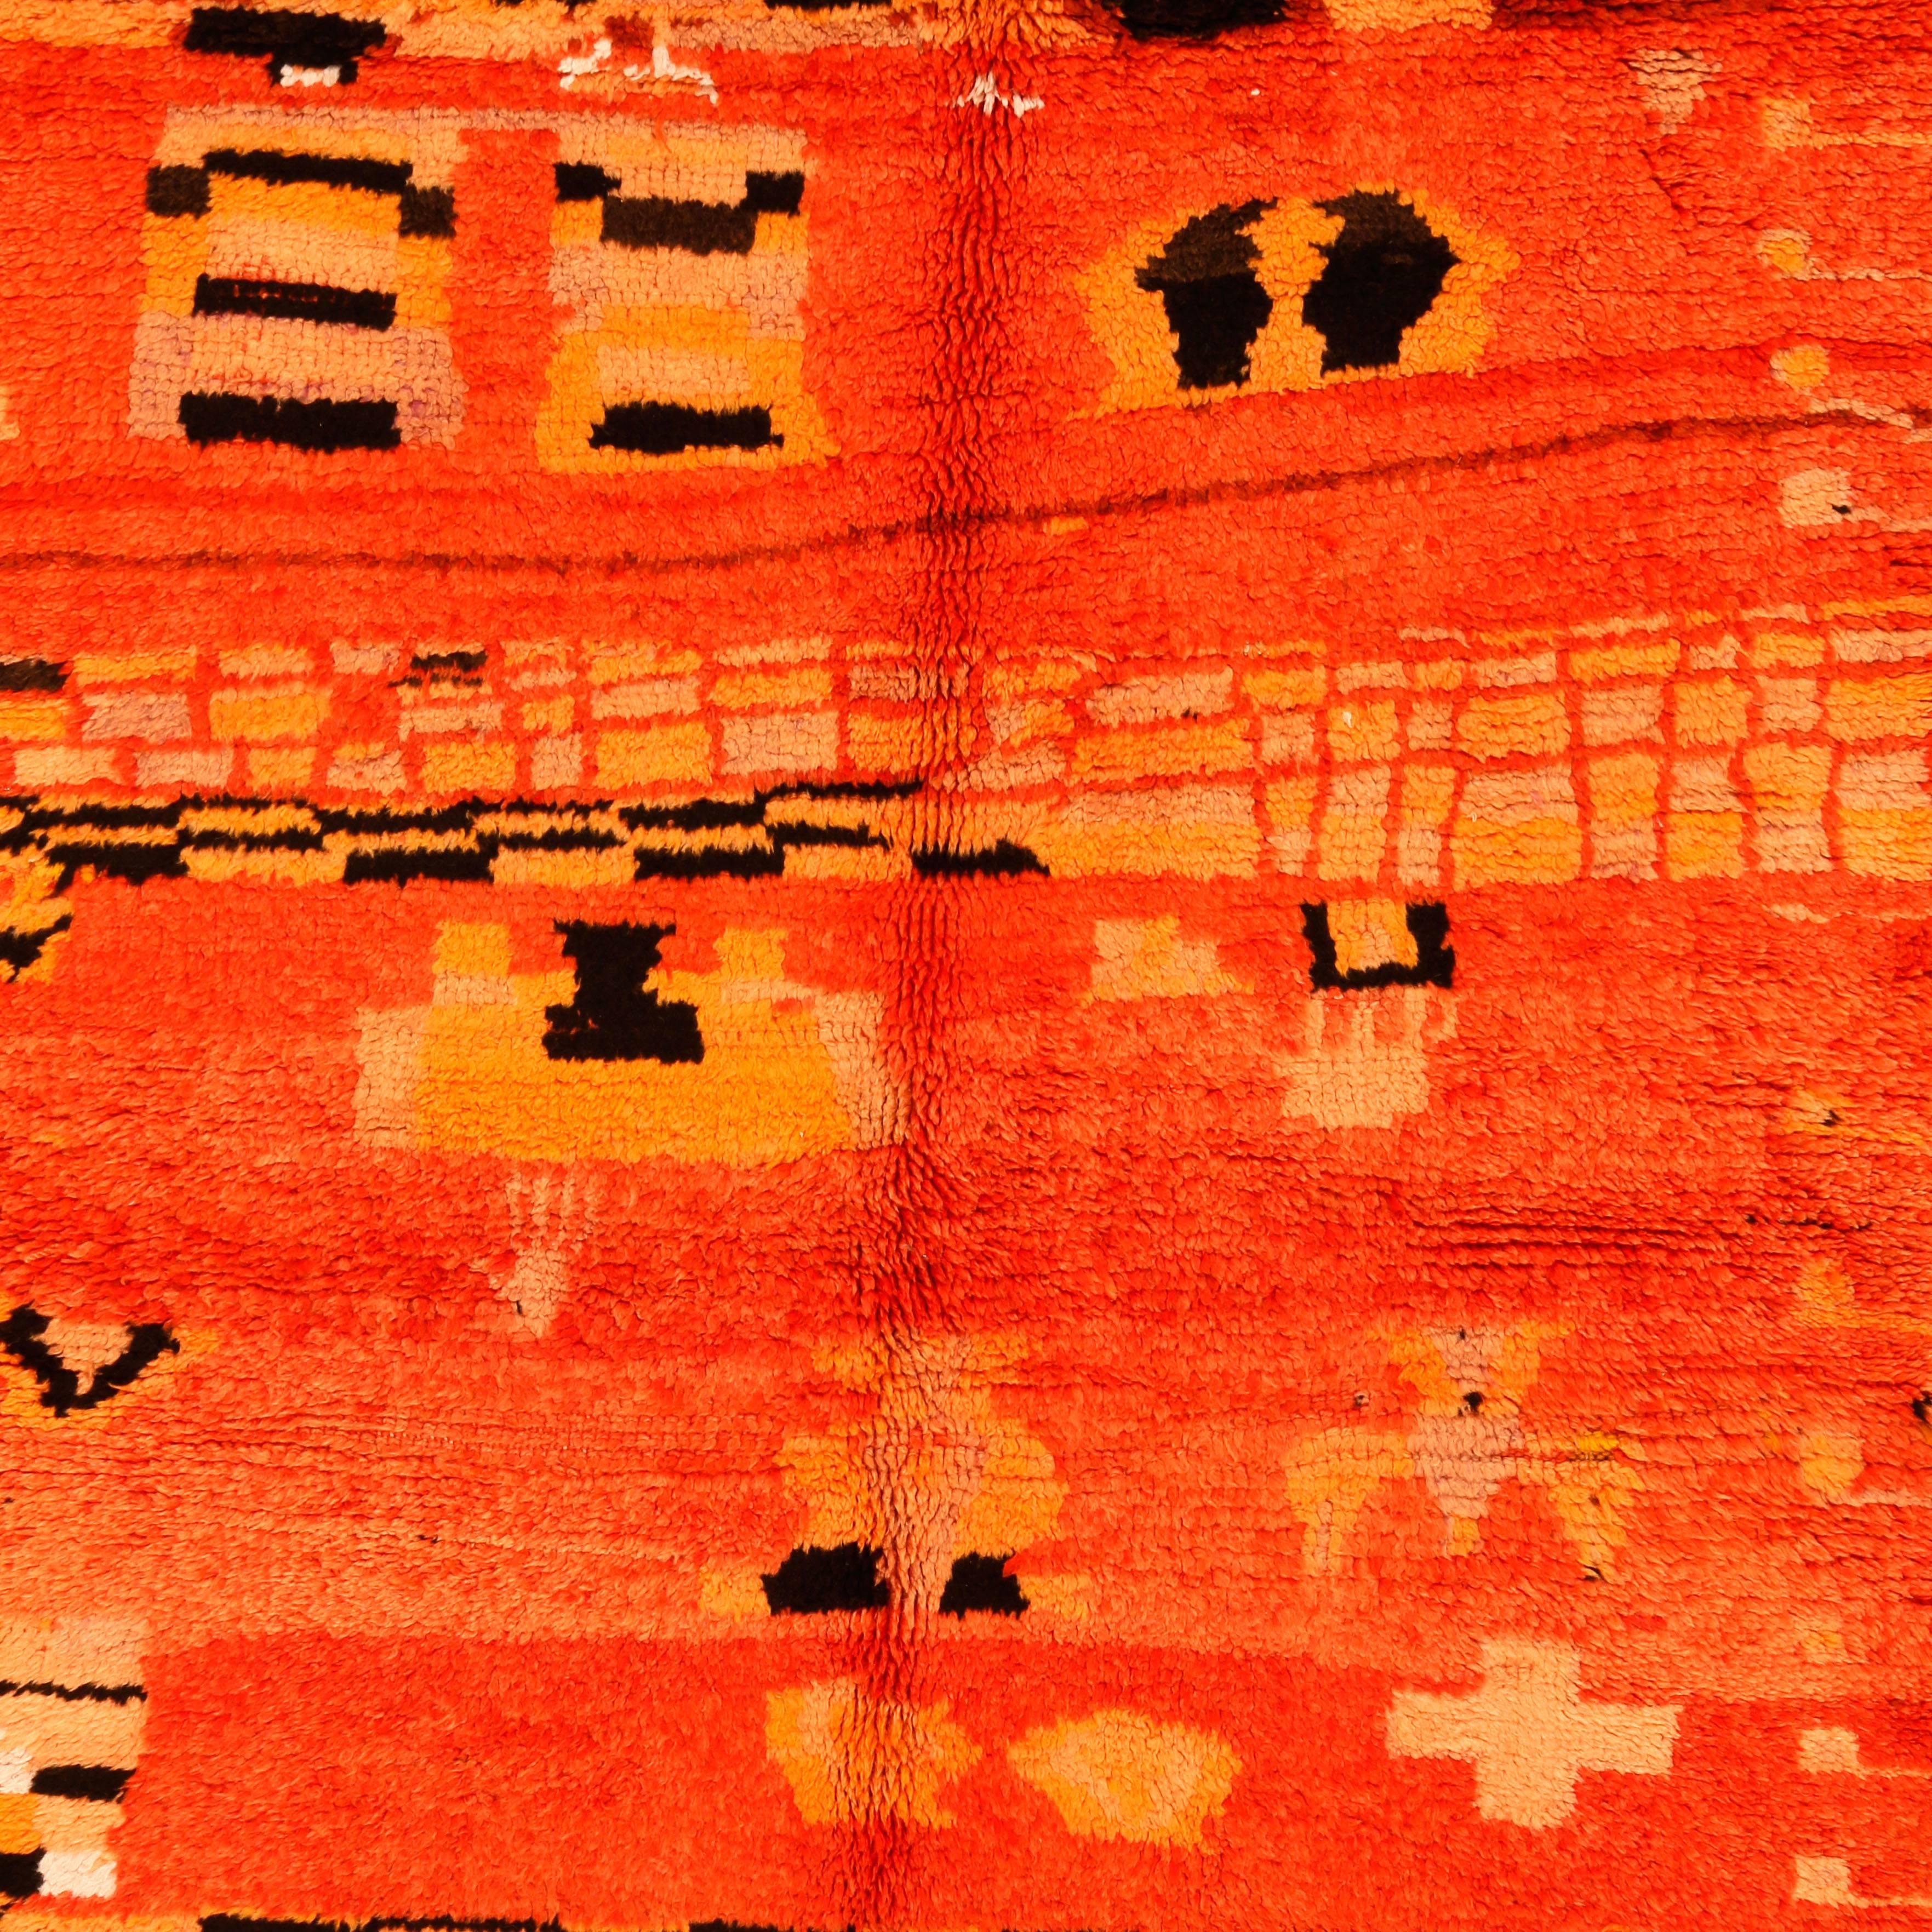 The Berber weavings from the Rehamna region, located in the plains near Marrakesh, are typically decorated by abstract geometric motifs on a red-orange ground. This example is embellished by various attempts at creating a chequerboard pattern